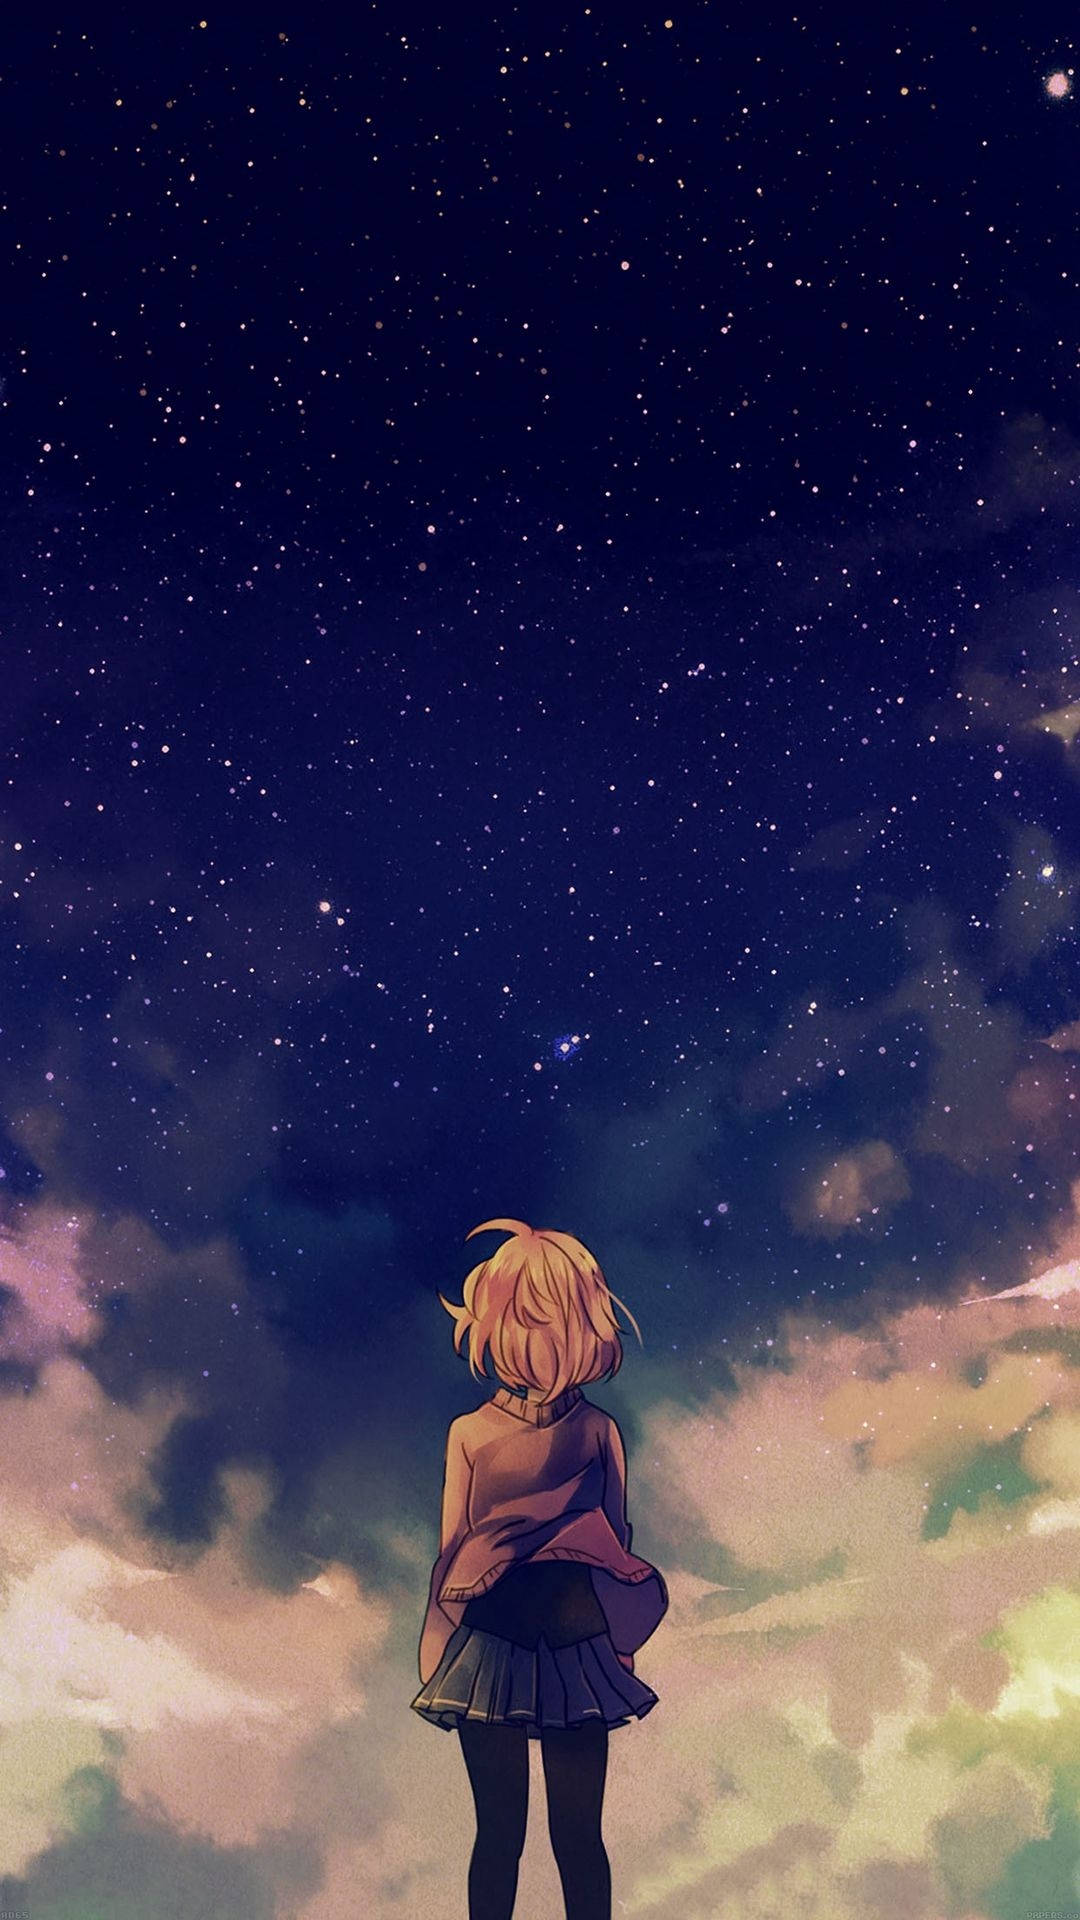 Super manga vibes with the IPhone Wallpaper